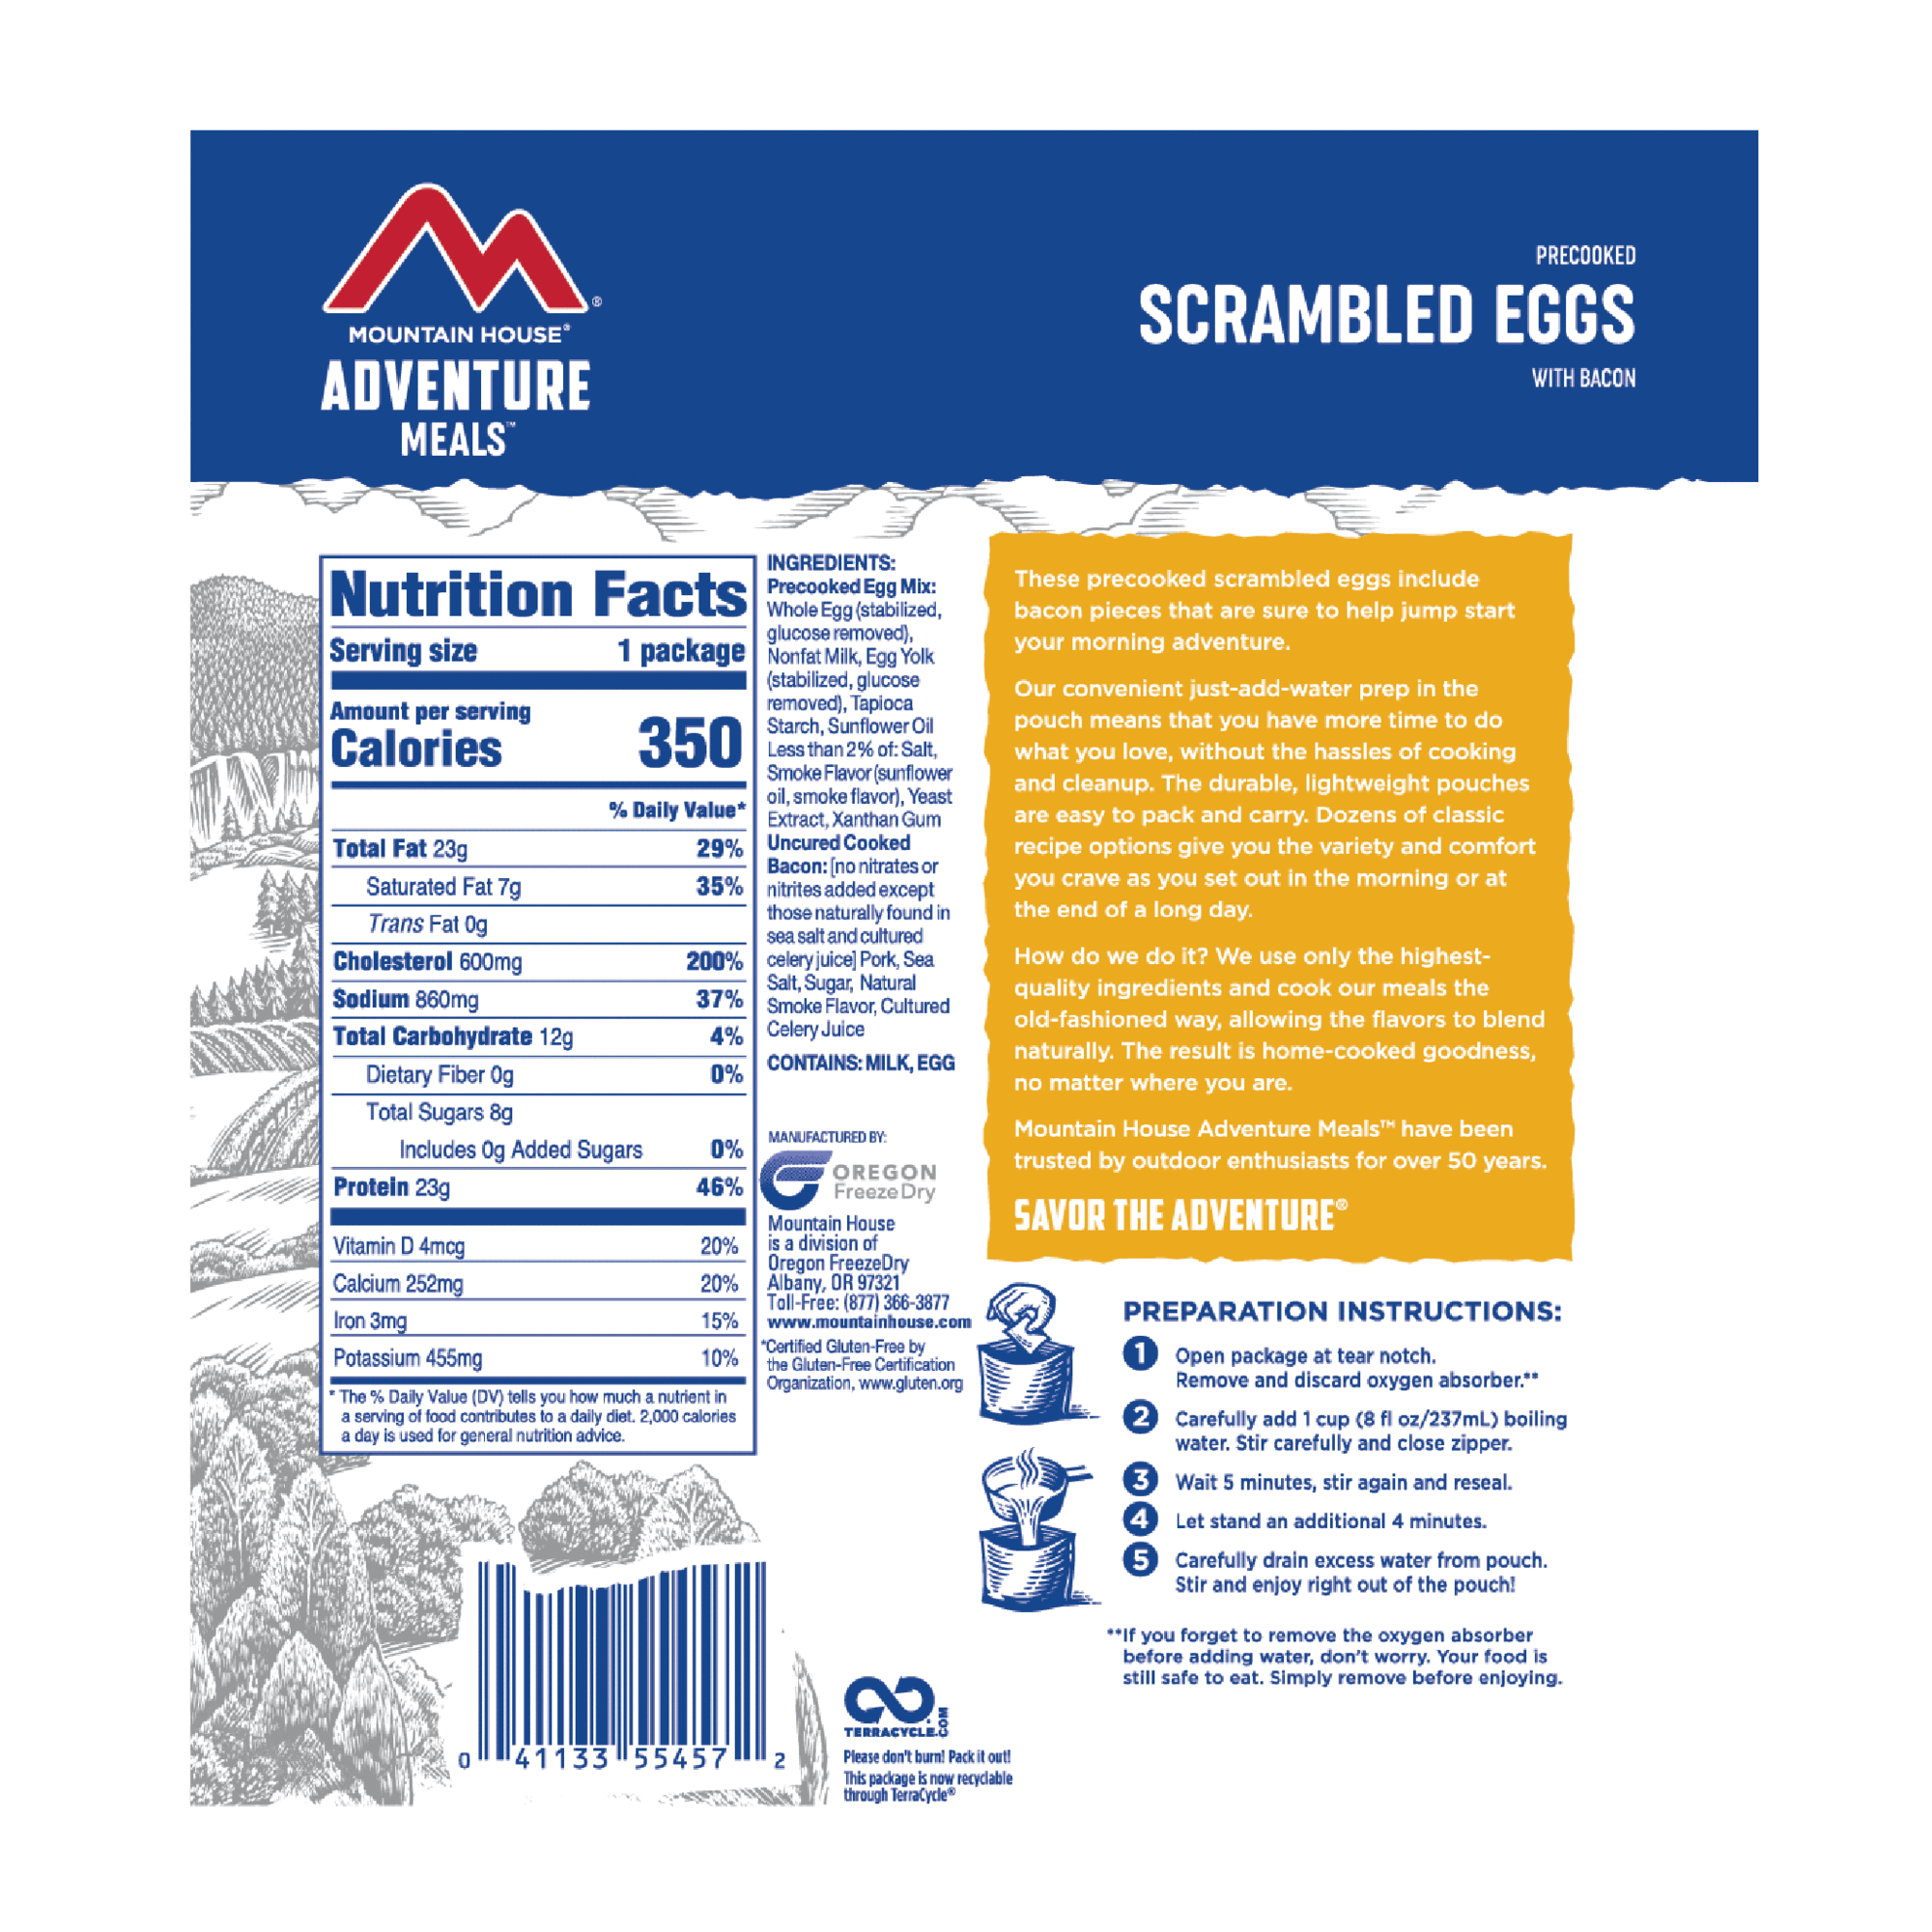 Mountain House Scrambled Eggs with Bacon nutrition label.